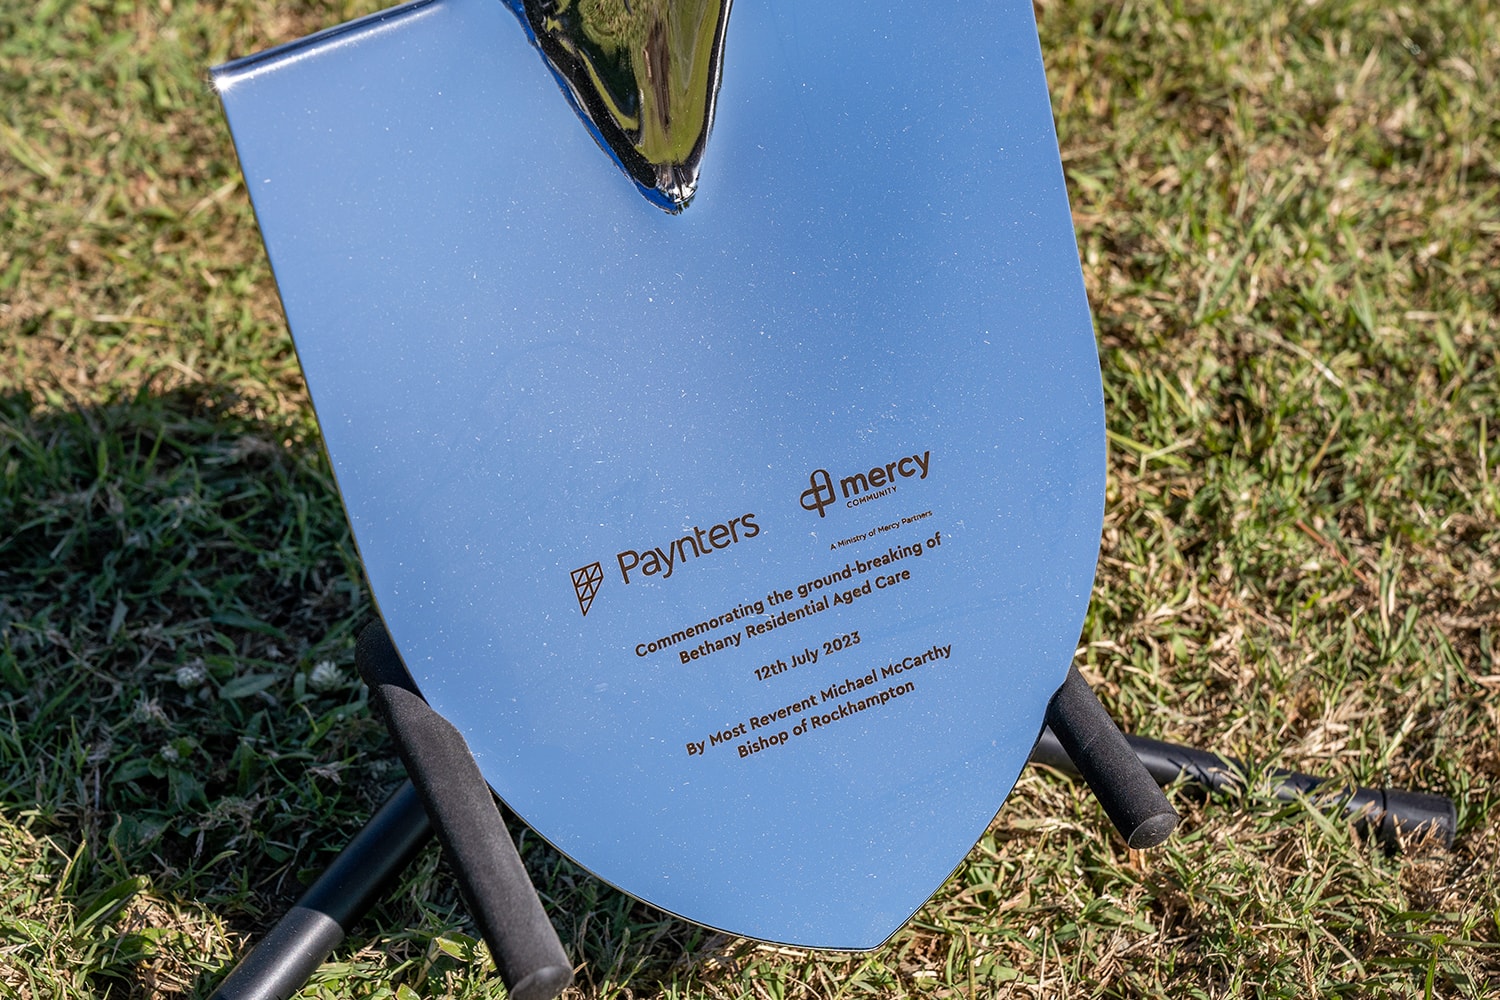 A close-up of the shovel used for the groundbreaking. It is a shiny metal with the Paynters and Mercy Community logo. Under the logo reads "Commemorating the ground-breaking of Bethany Residential Aged Care. 12th July 2023. By Most Reverent Michael McCarthy Bishop of Rockhampton.